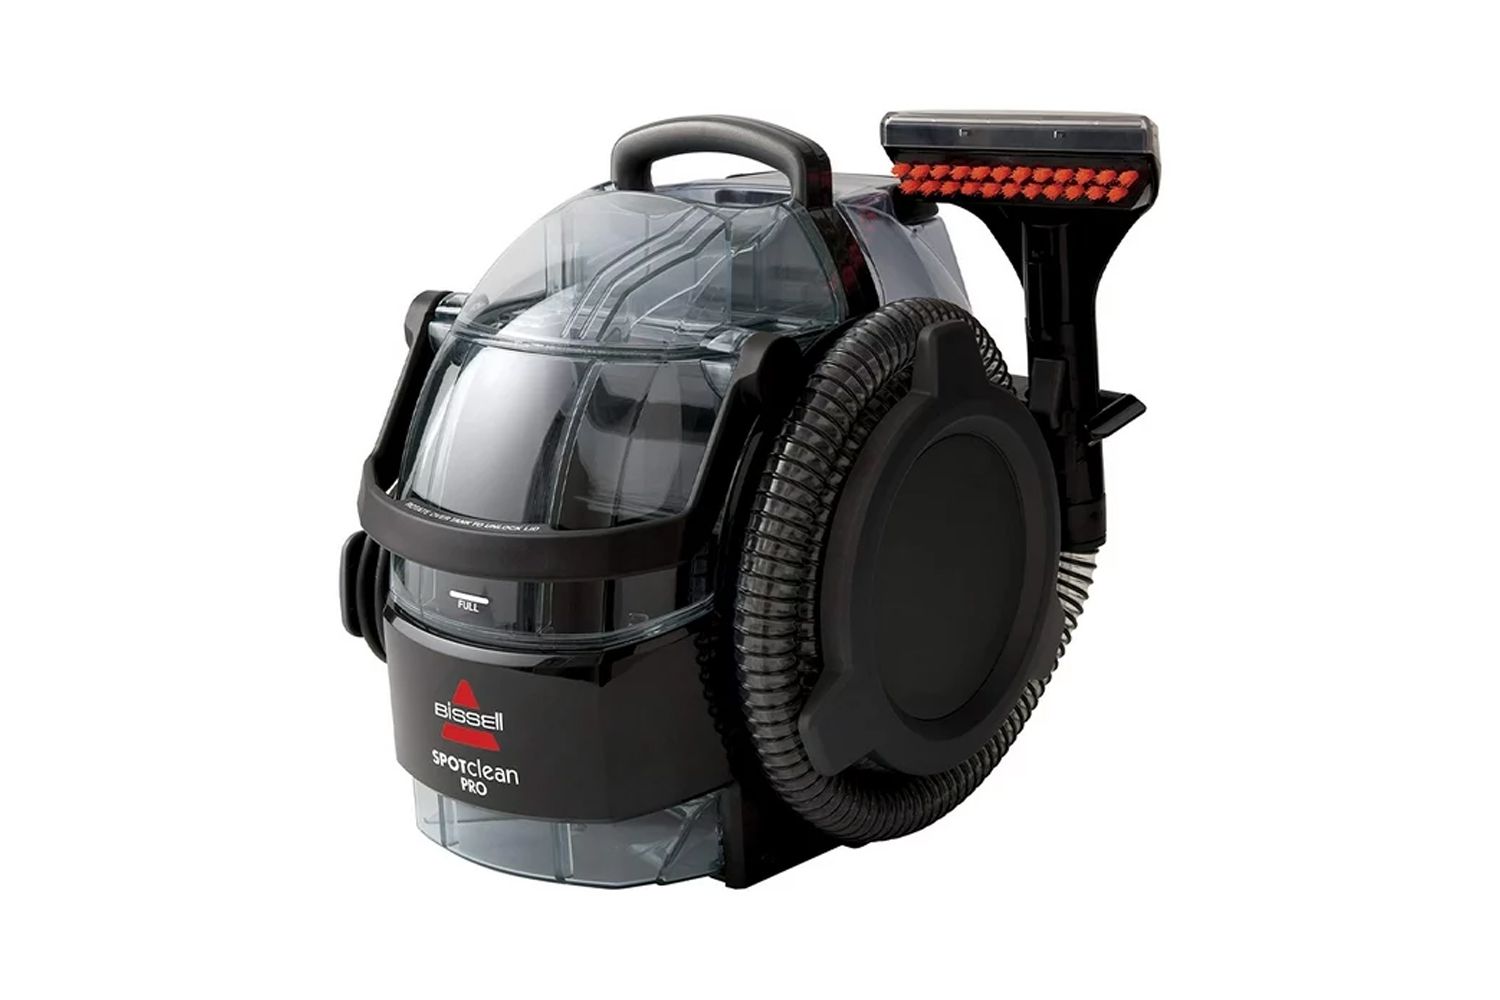 Bissell 3624 Spot Clean Pro Portable Carpet Cleaner